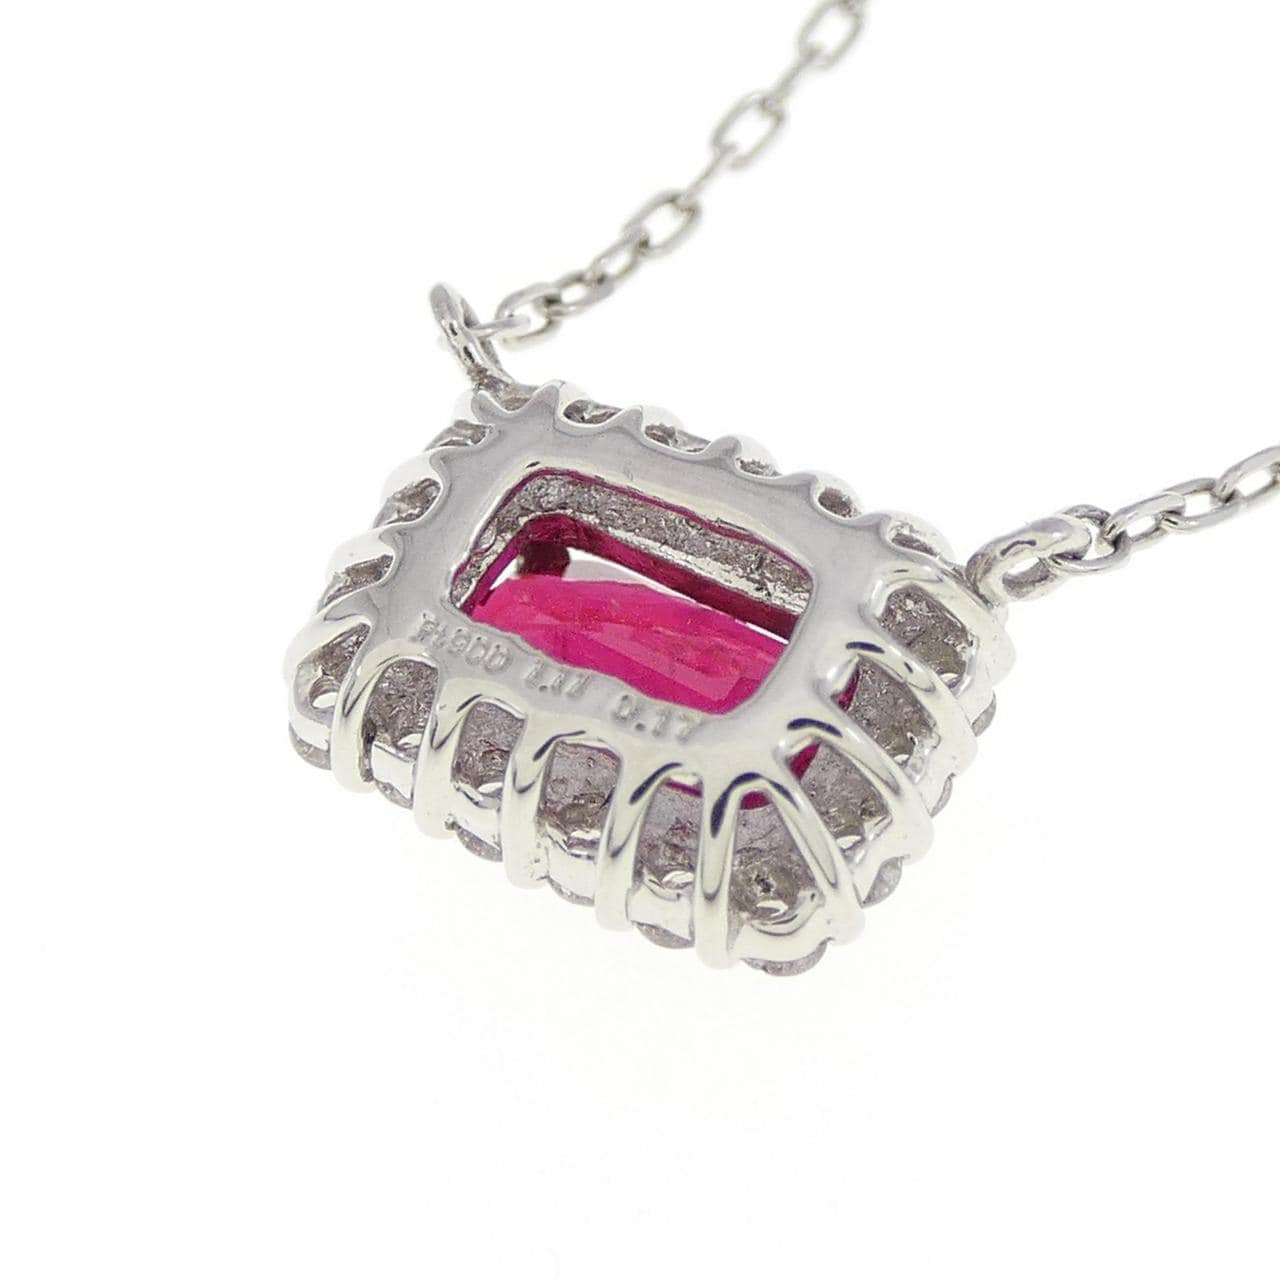 [Remake] PT Ruby Necklace 1.11CT Made in Burma